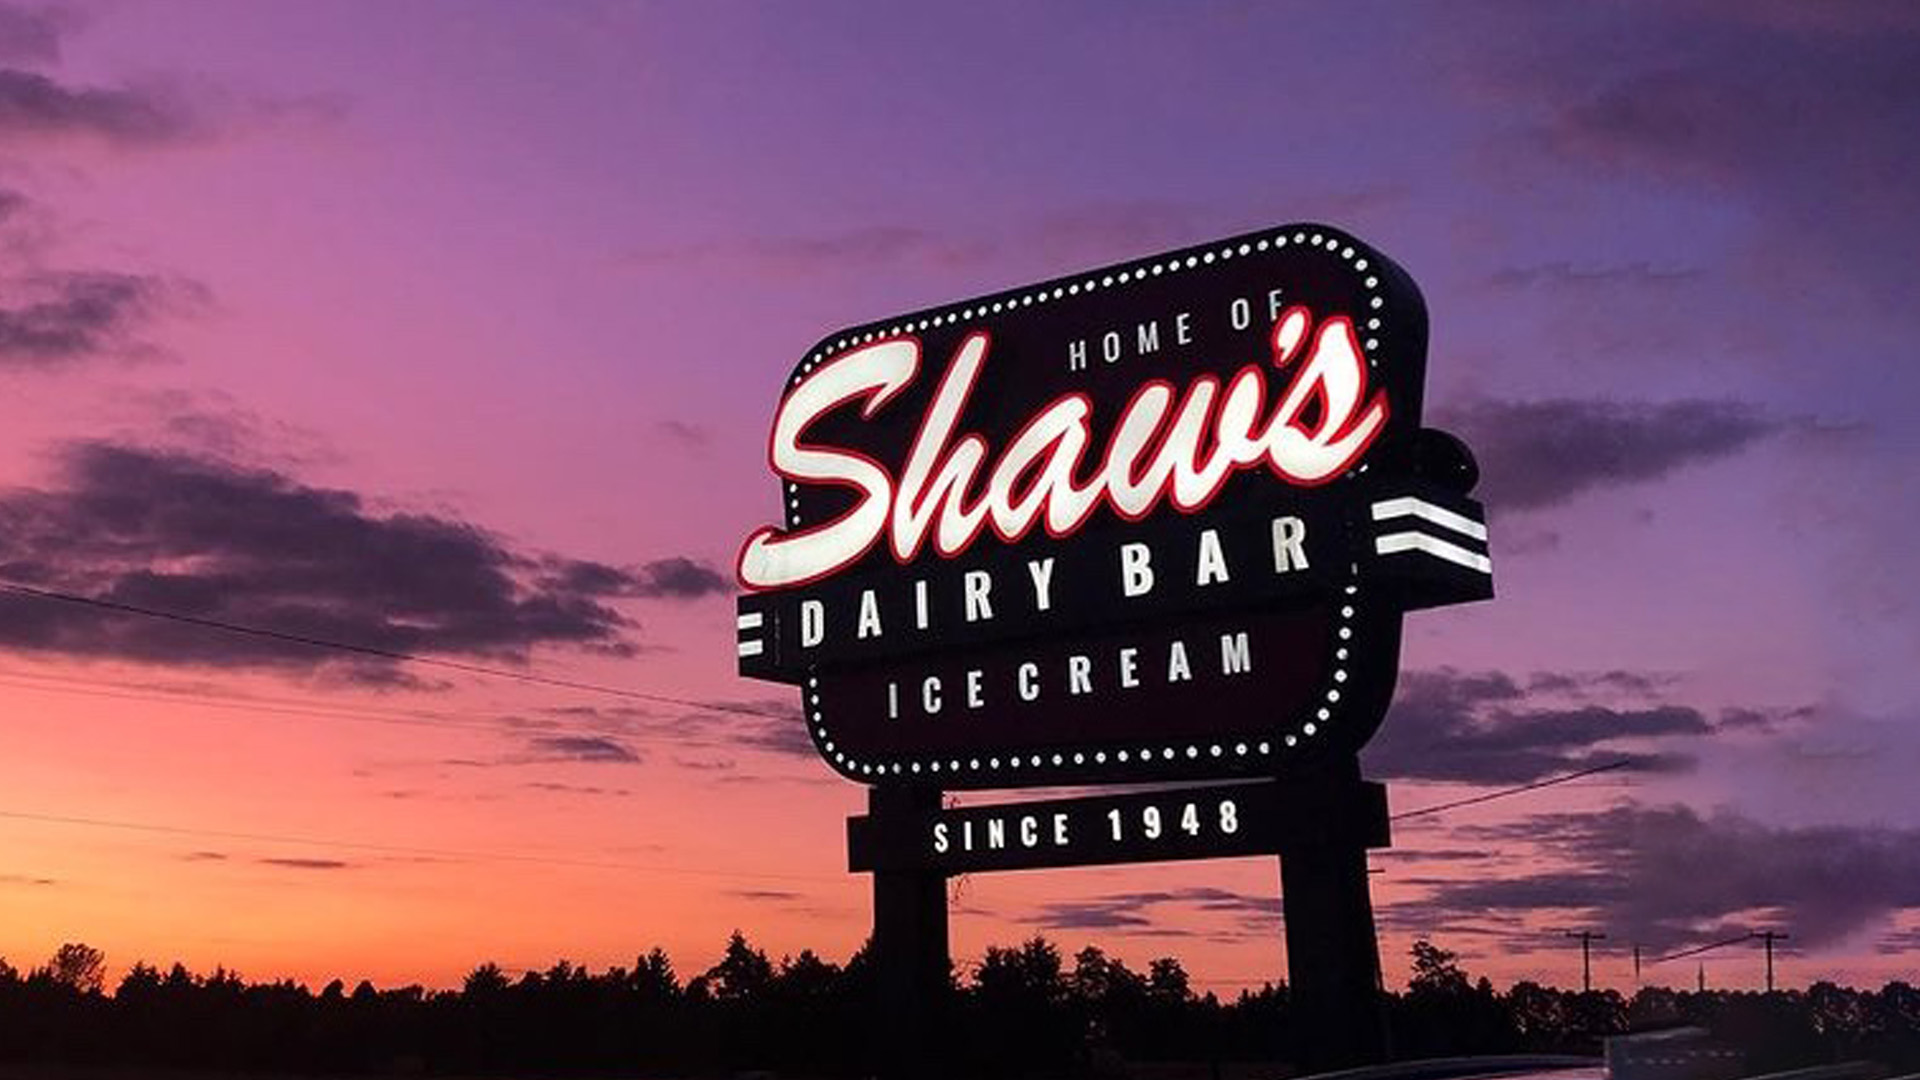 An image of the Shaw's Ice Cream sign outside of their parlour at sunset.